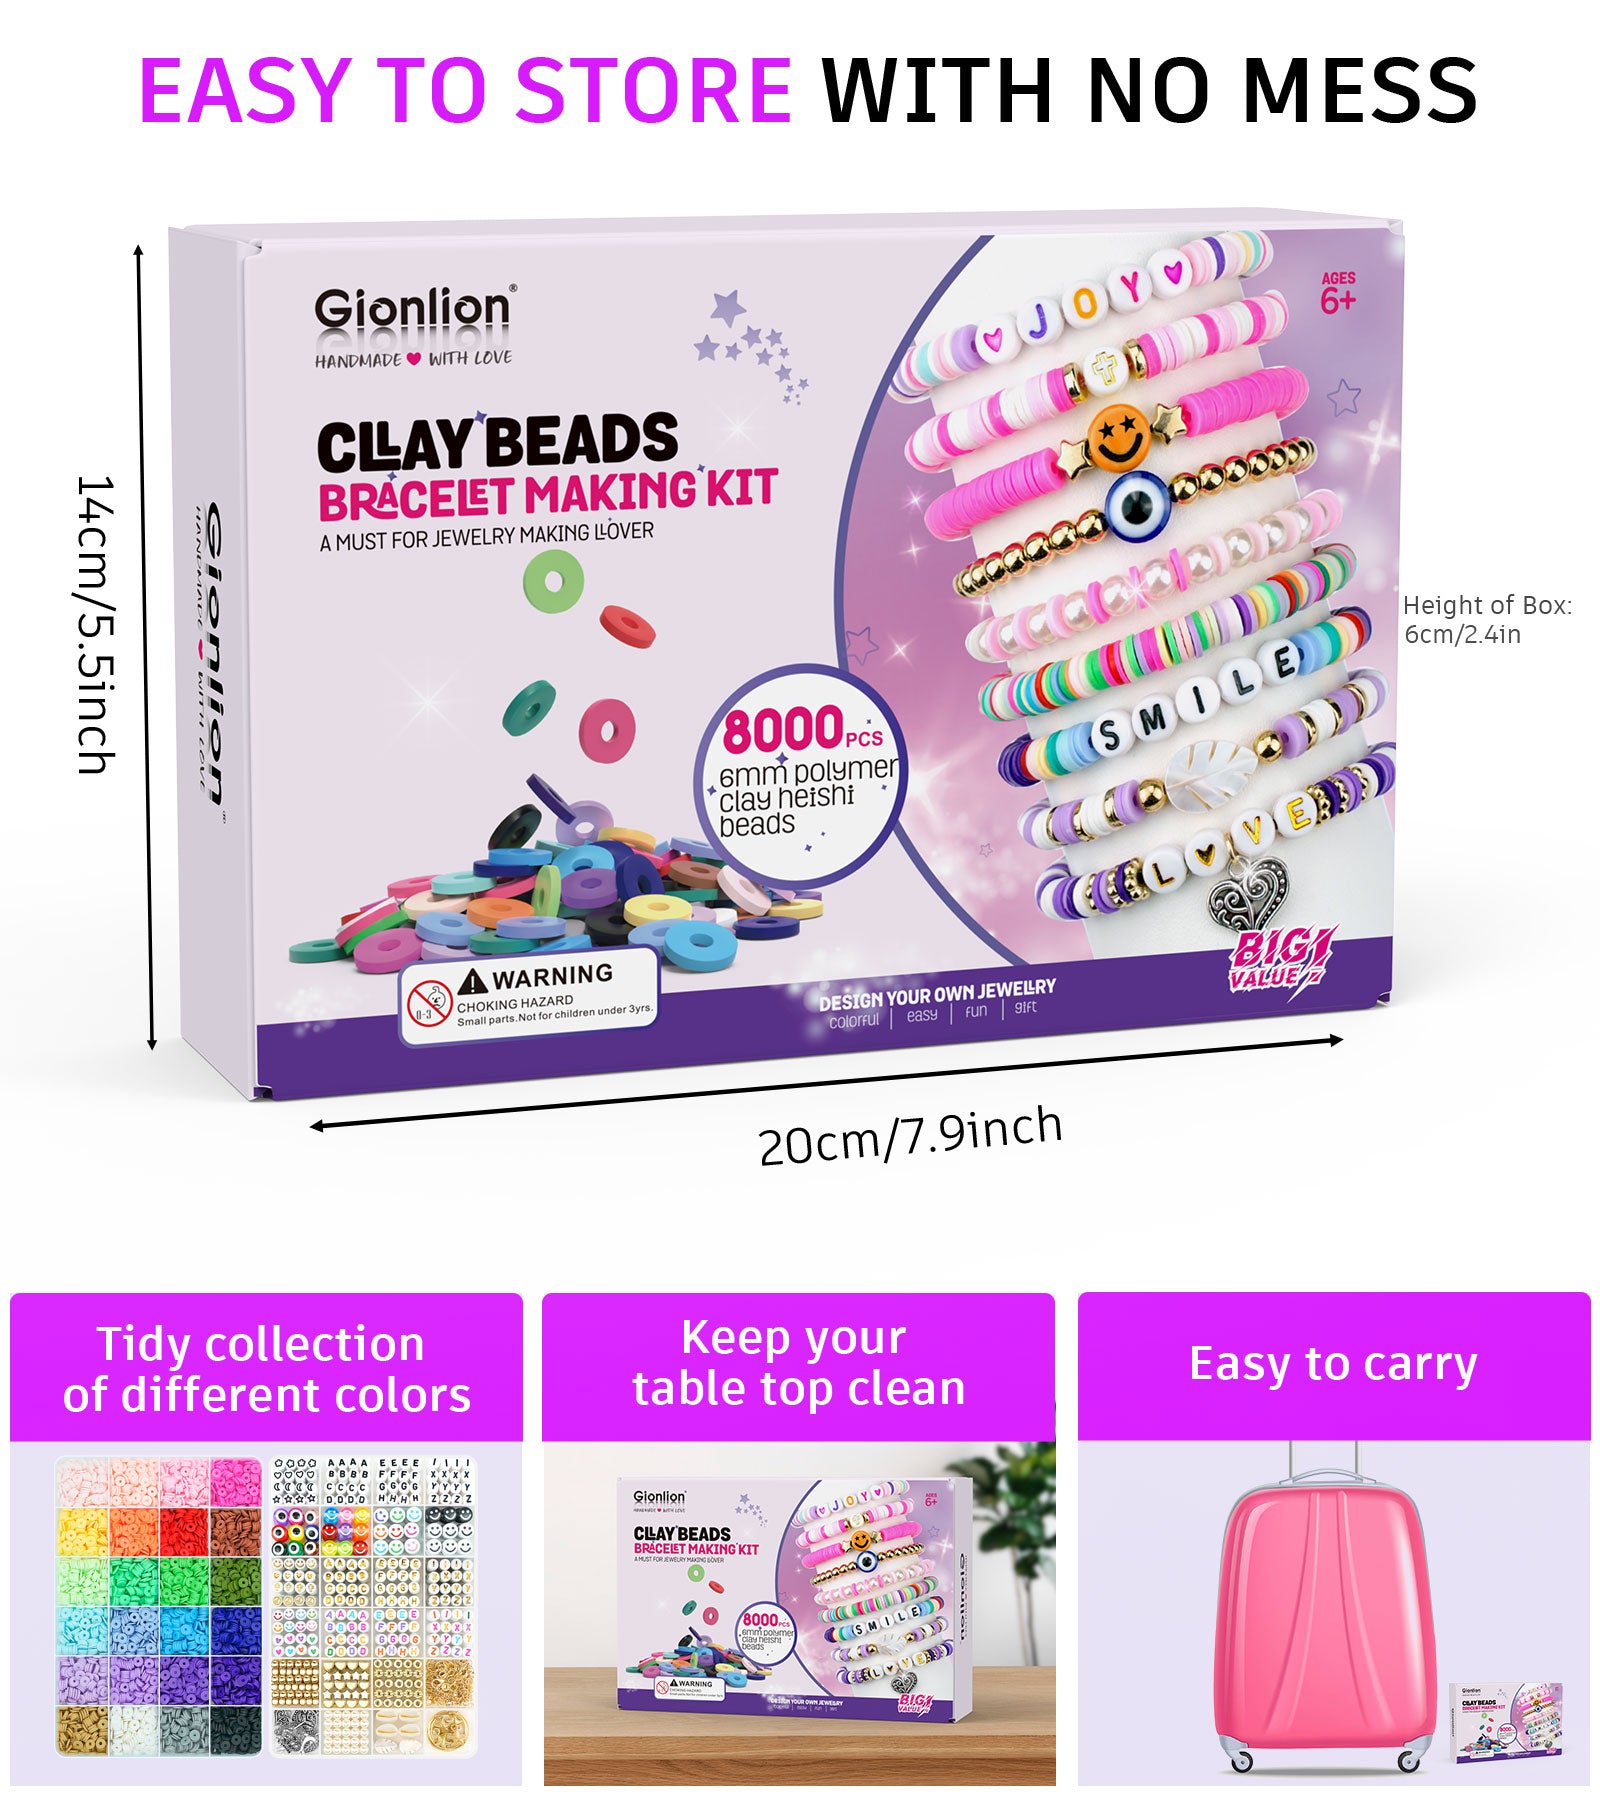 Gionlion Clay Beads Bracelet Making Kit, 8000PCS Preppy Clay Beads Letter Beads Spacer Beads and Charms Kit for Friendship Jewelry Making, Crafts Gift for Girls Ages 8-12